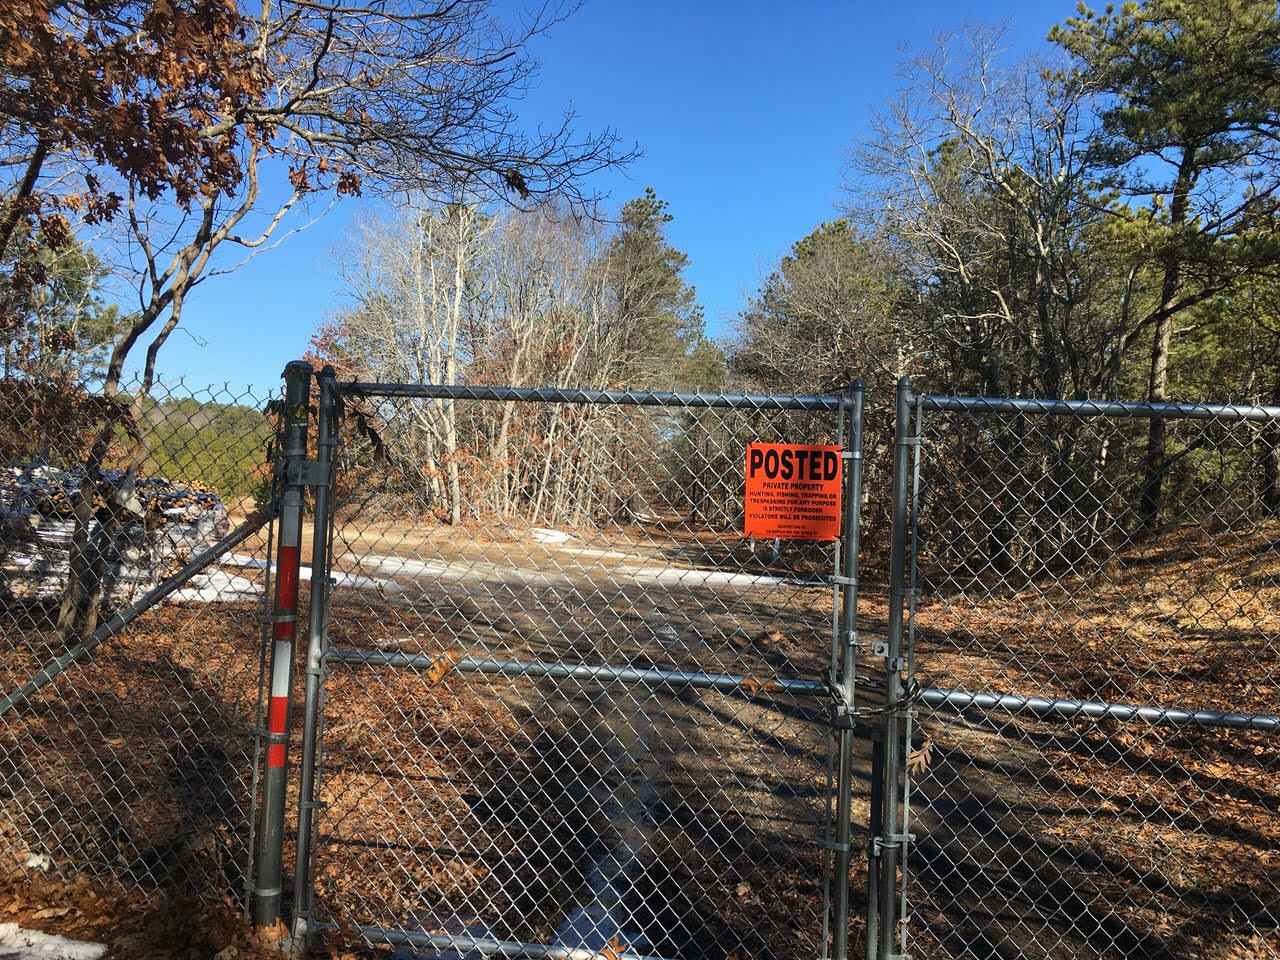 Planners want details about the fence closing off Spinney Road to the public.